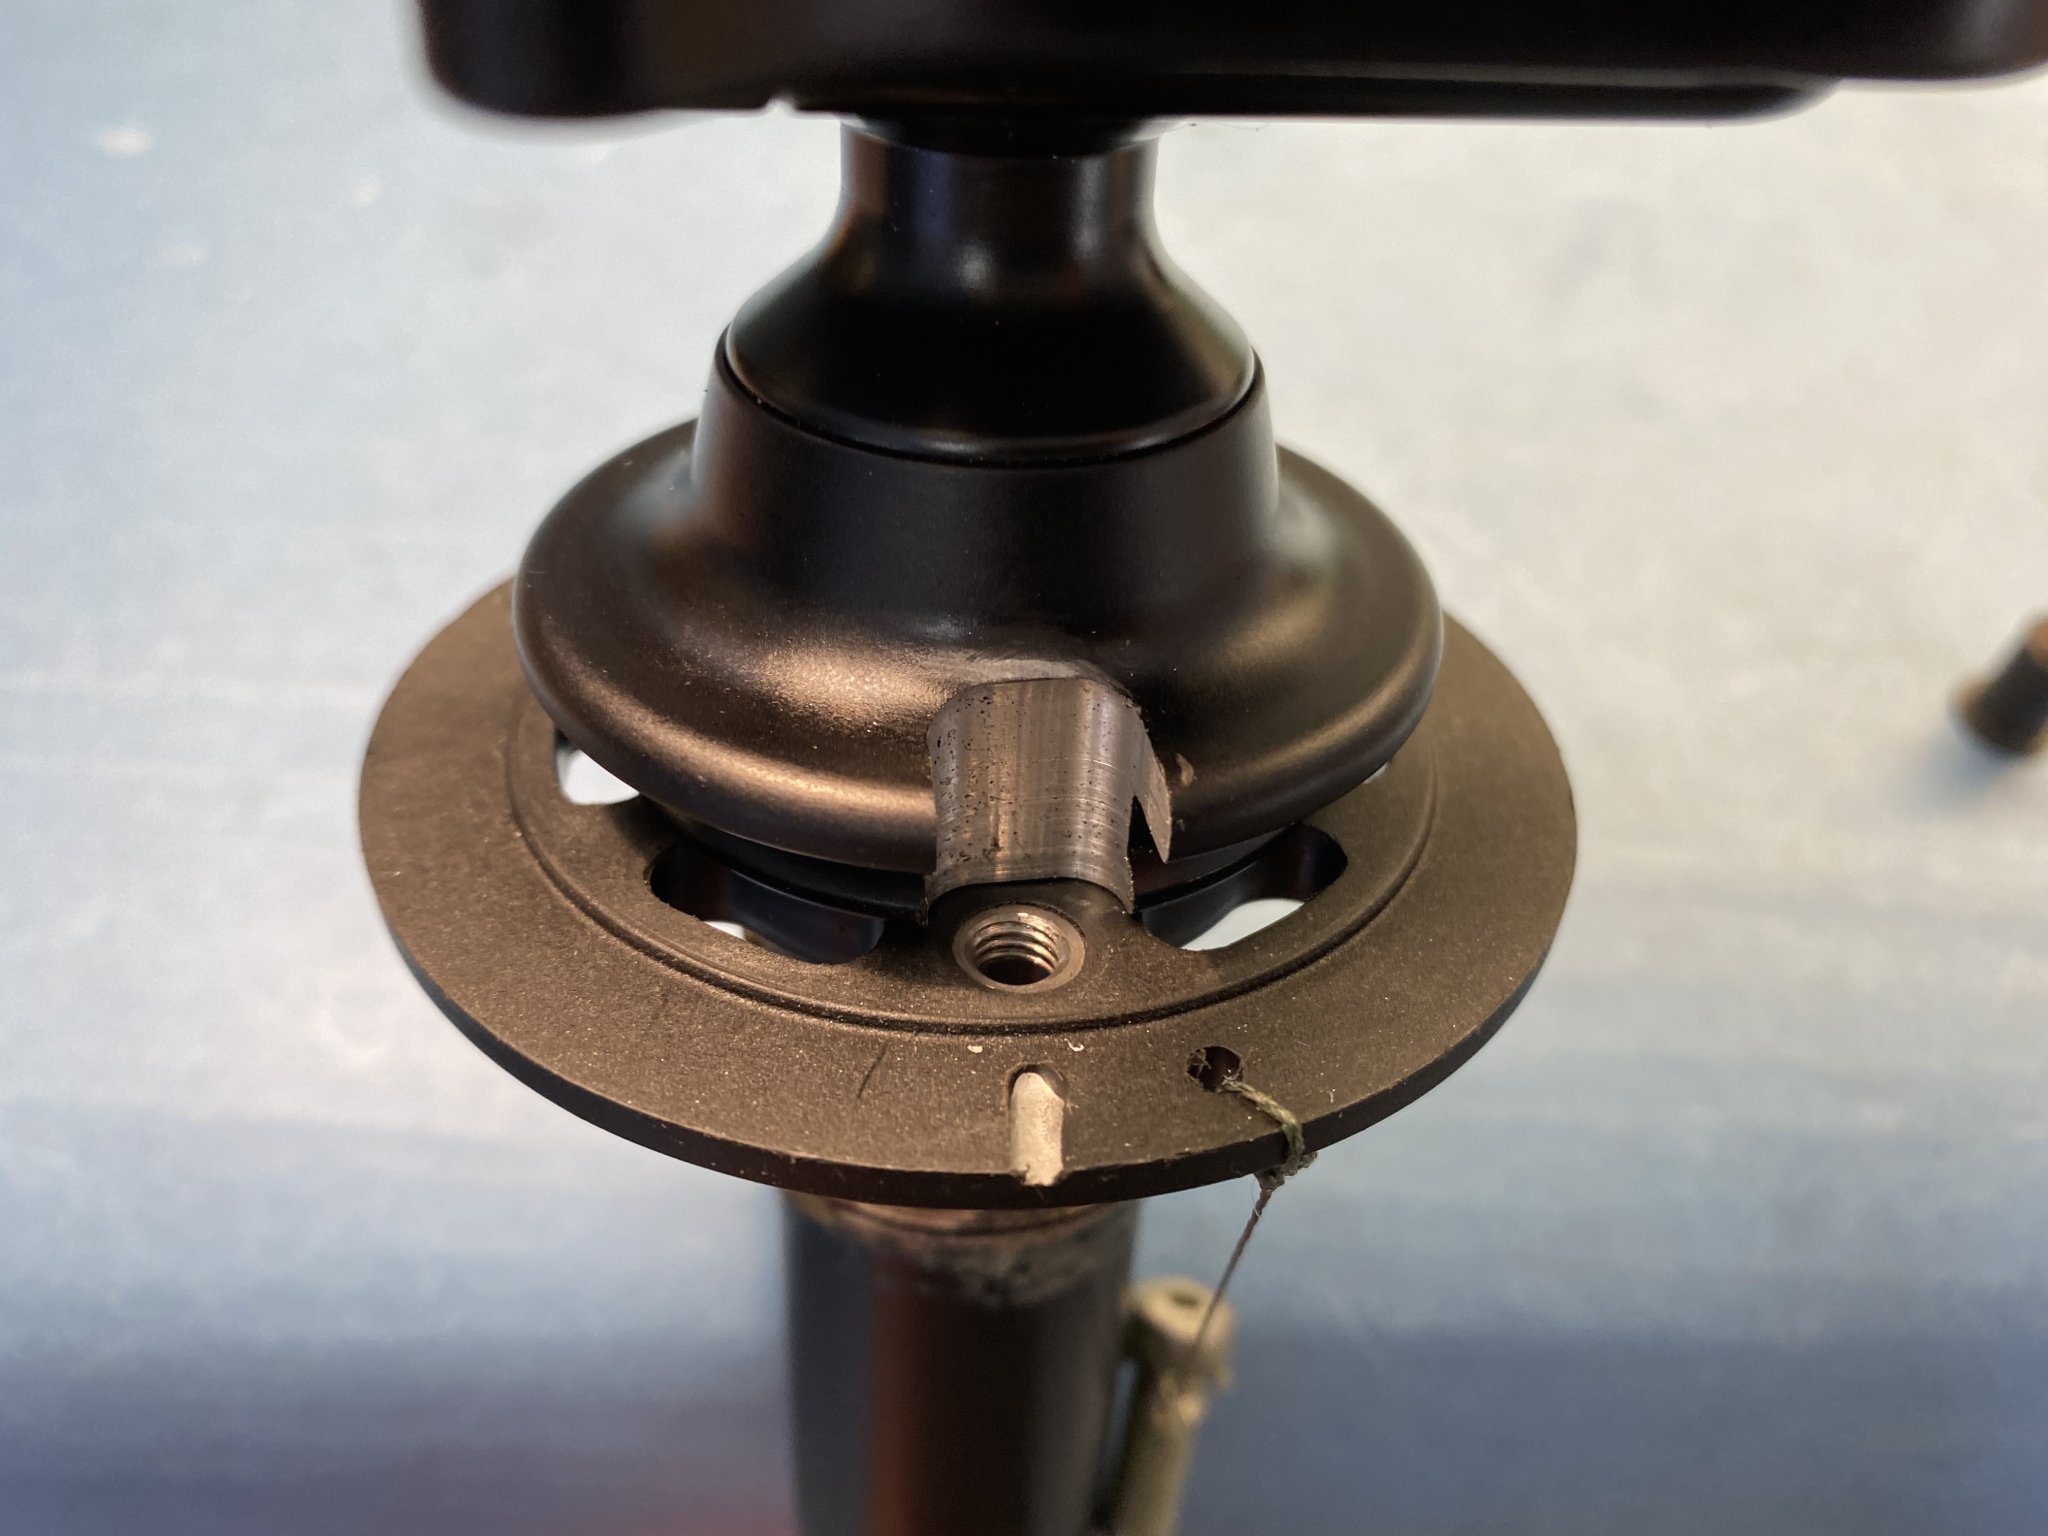 IMG_8607RRS Anvil-30 Adapter 2 Ball End Milled with Indexing Bolt to Swarovski Tripod Center C...jpg